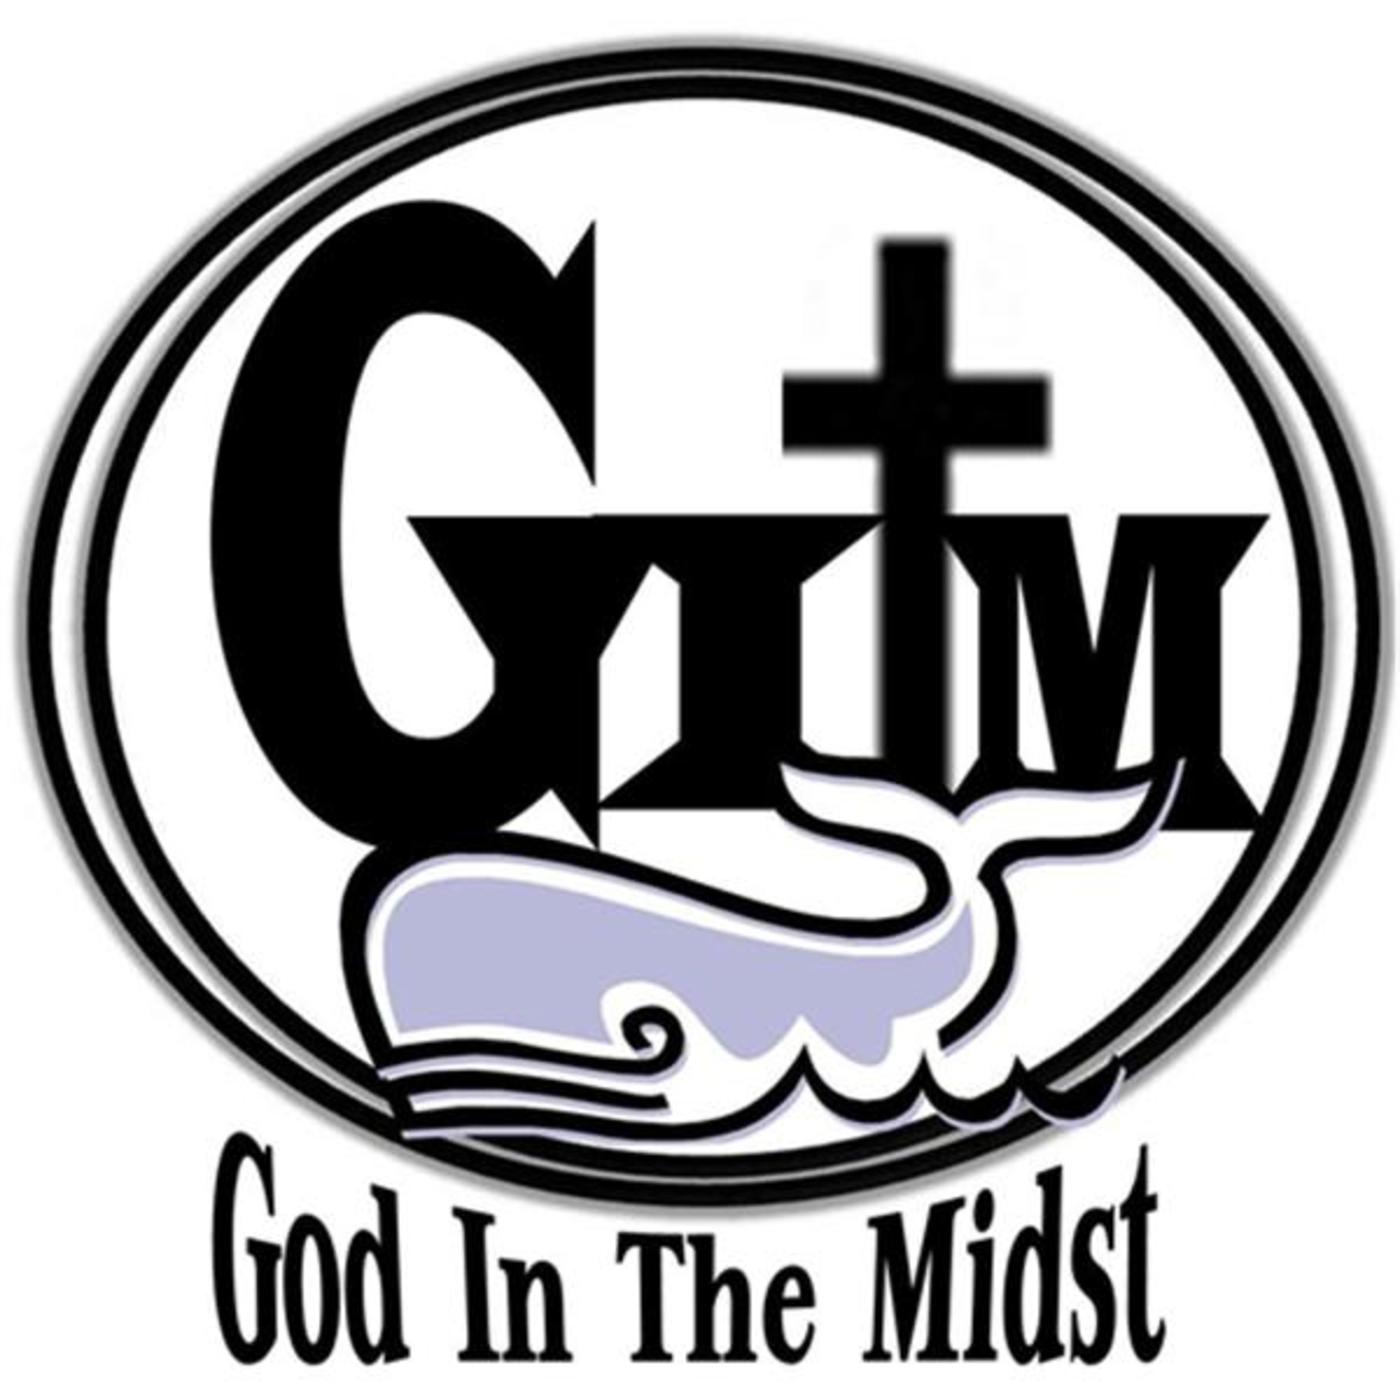 God In The Midst:God In The Midst